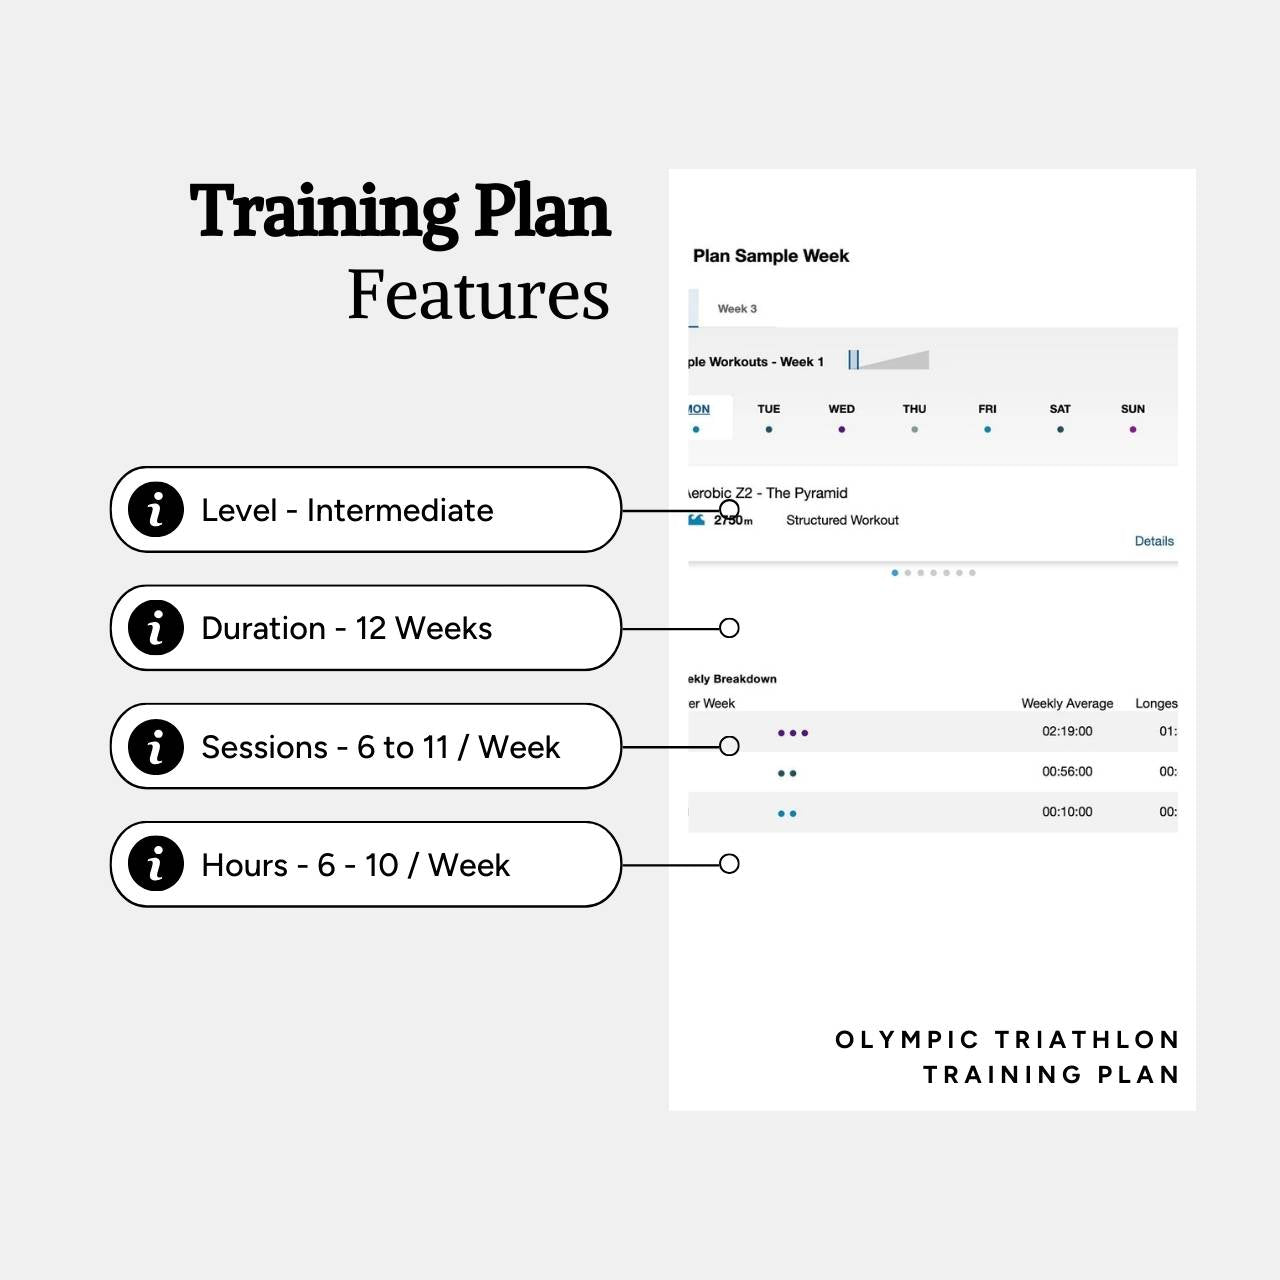 BROWNLEE FITNESS Olympic Triathlon Training Plan Features